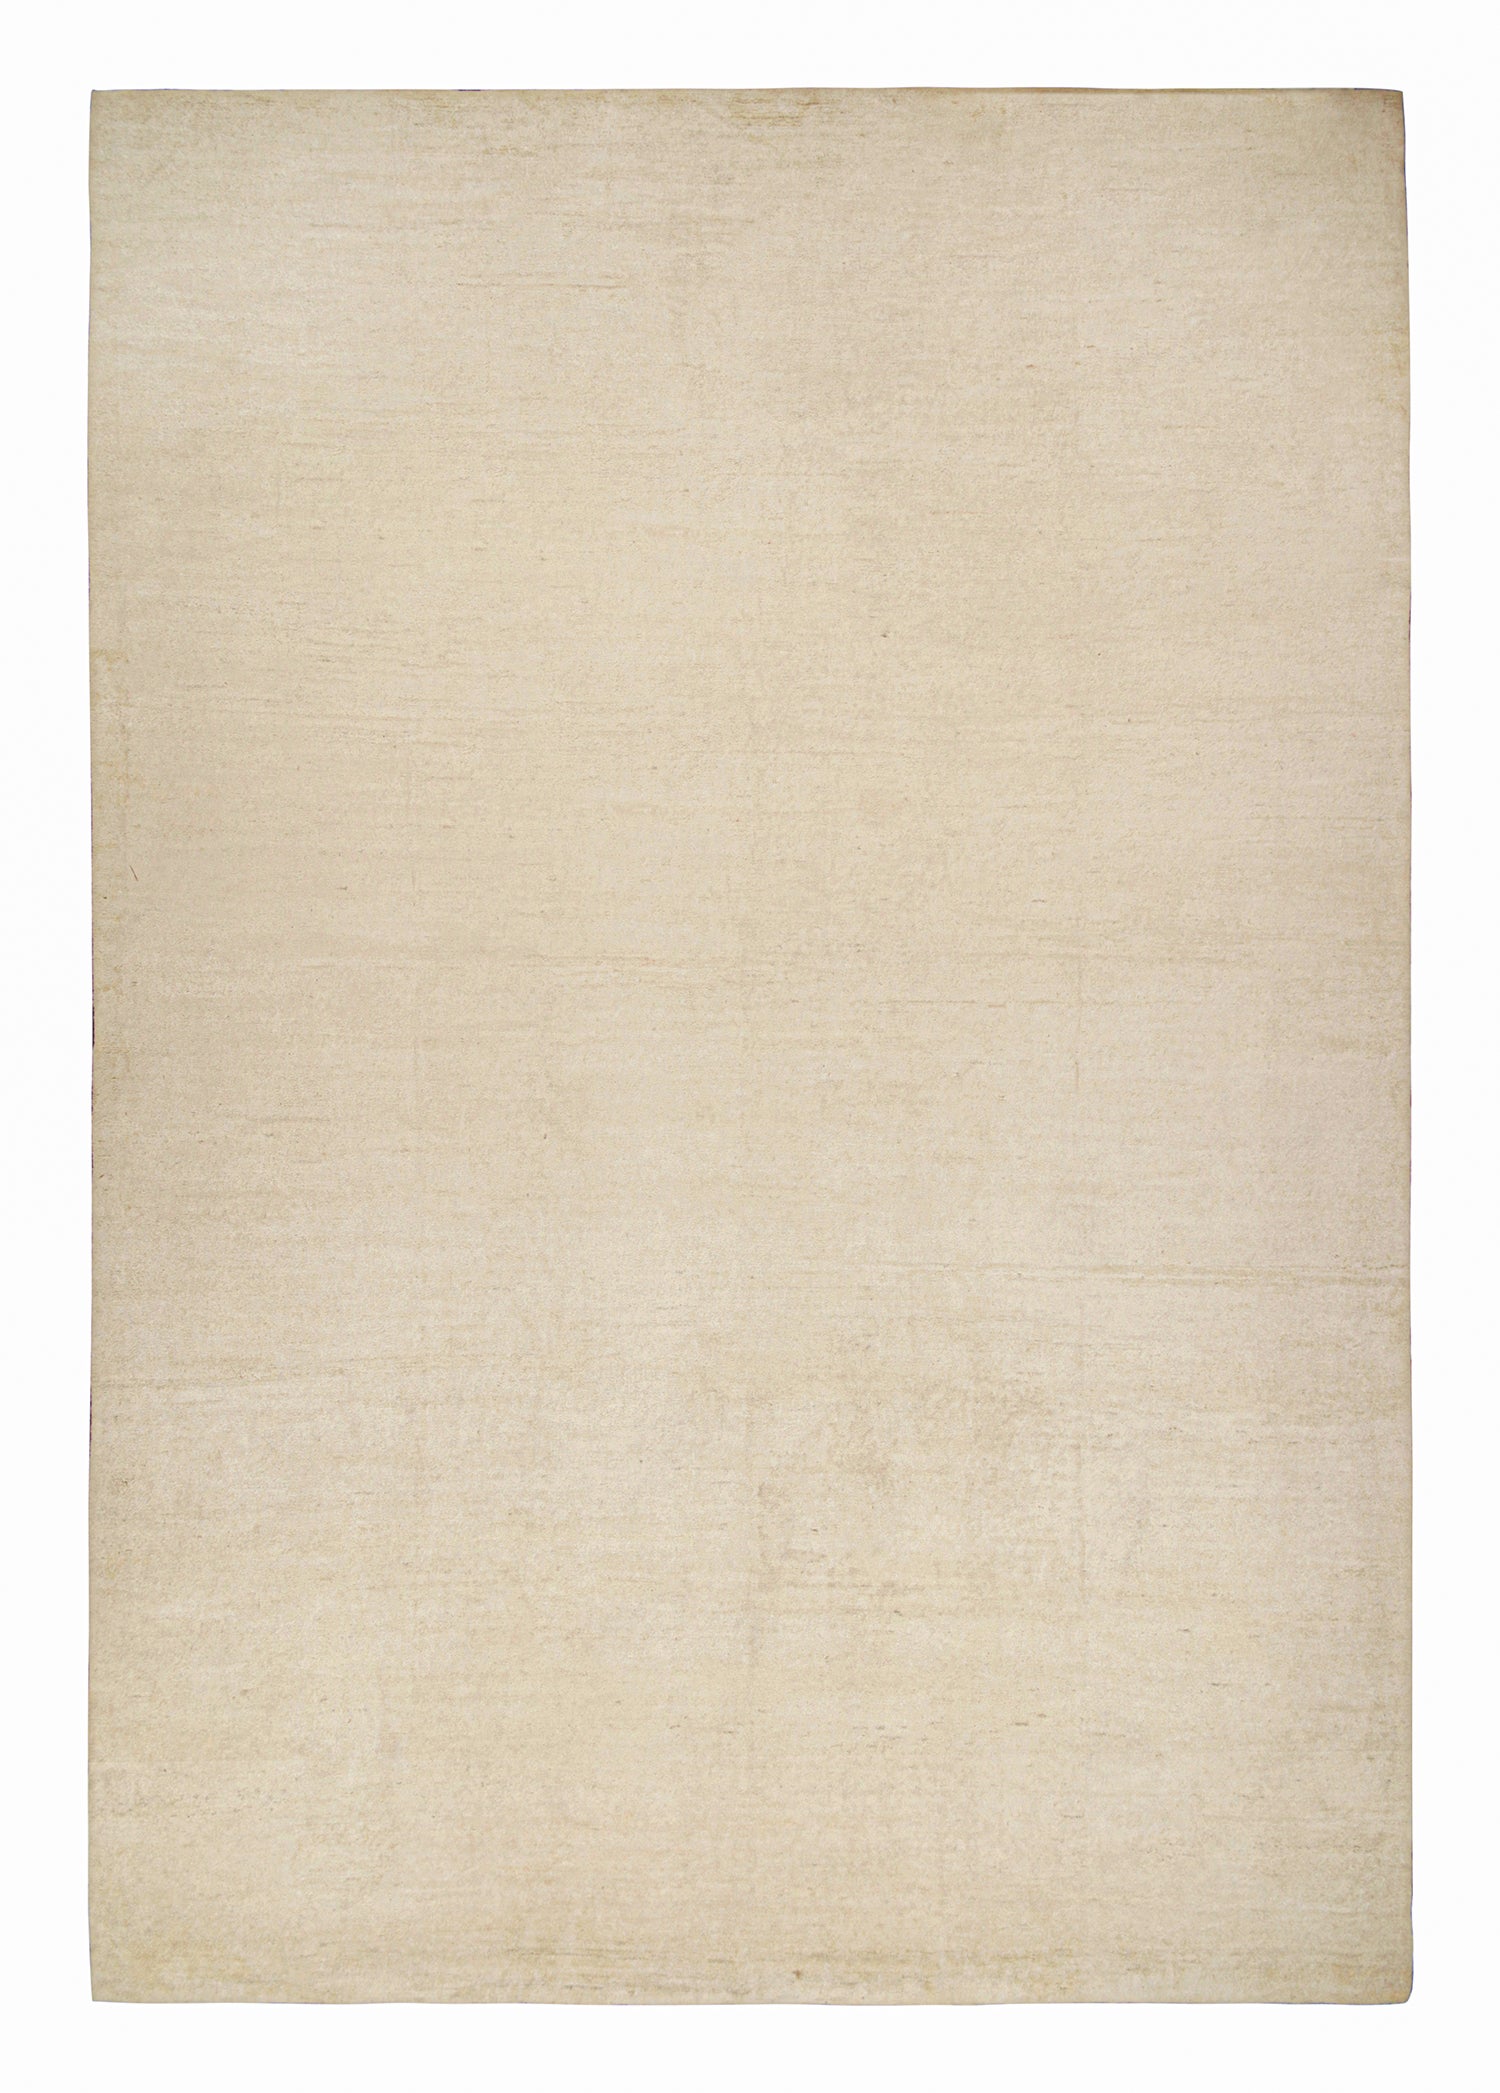 Rug & Kilim’s Solid Beige-Brown Rug in Tone-on-tone Contemporary Style For Sale